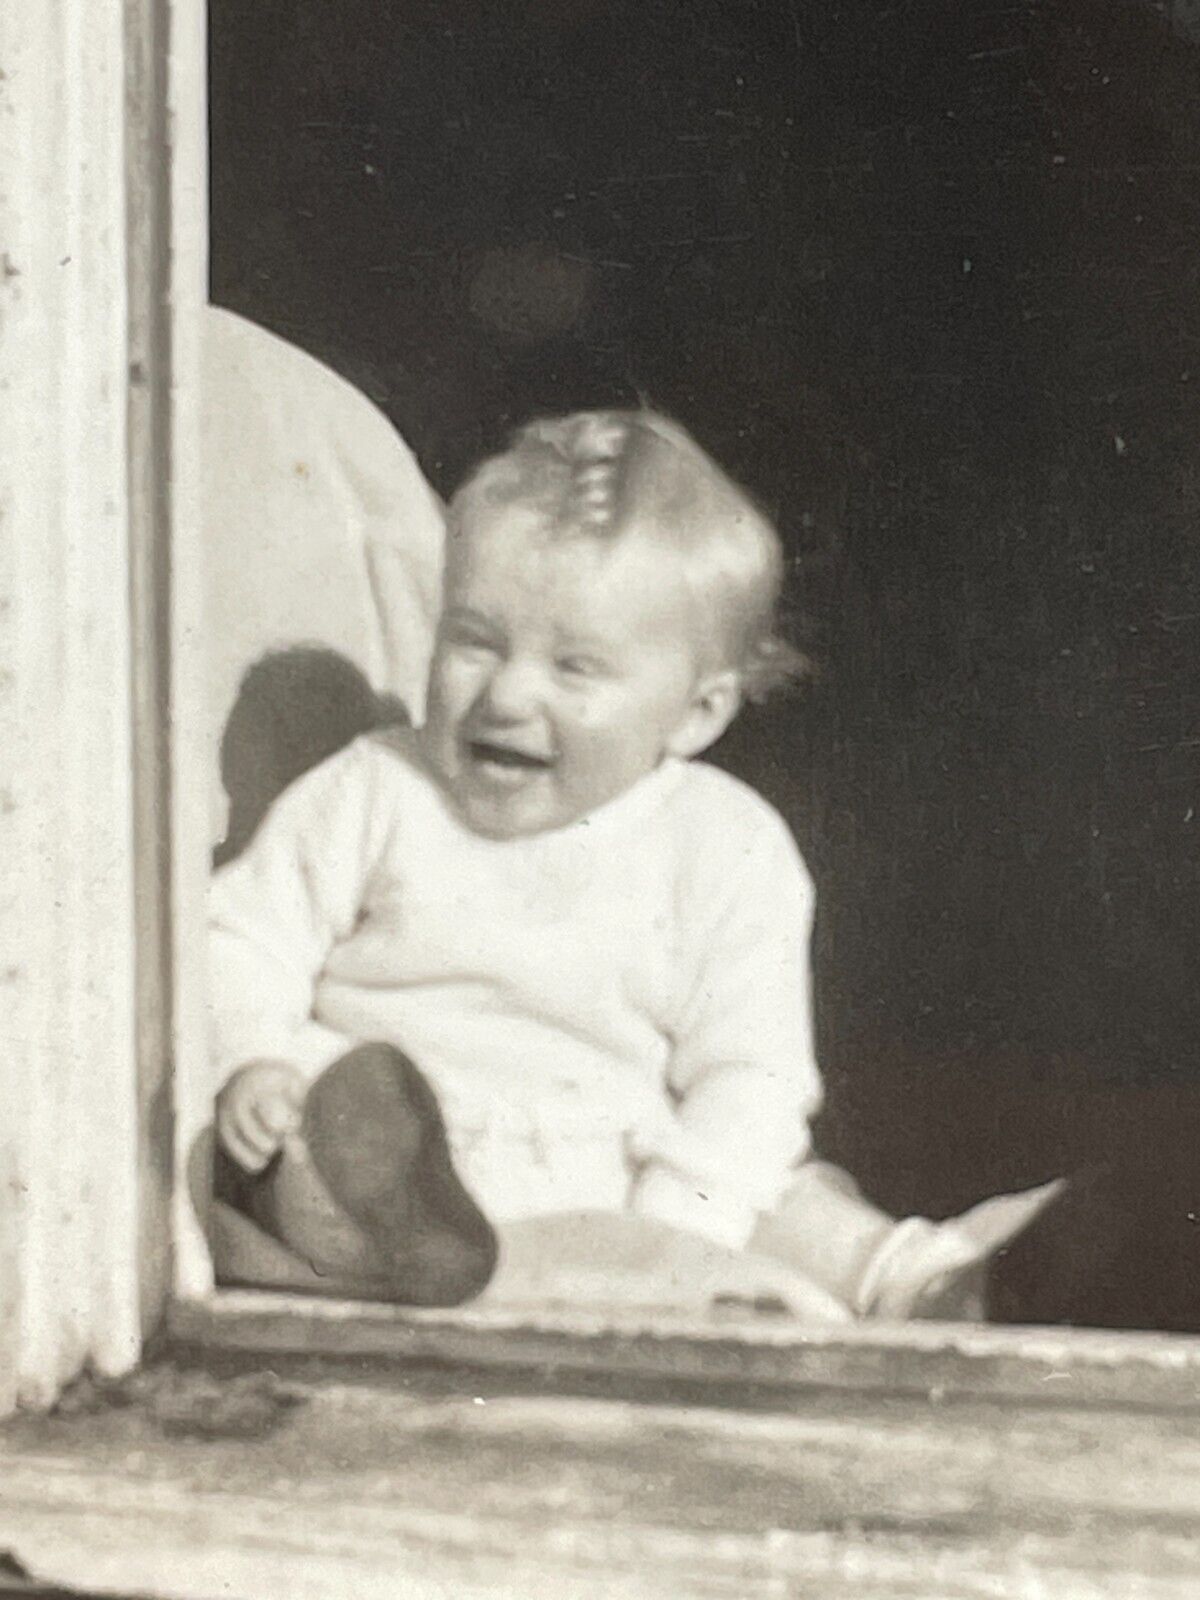 SB Photograph 1939 Baby Infant Doorway Laughing Smiling Happy Portrait